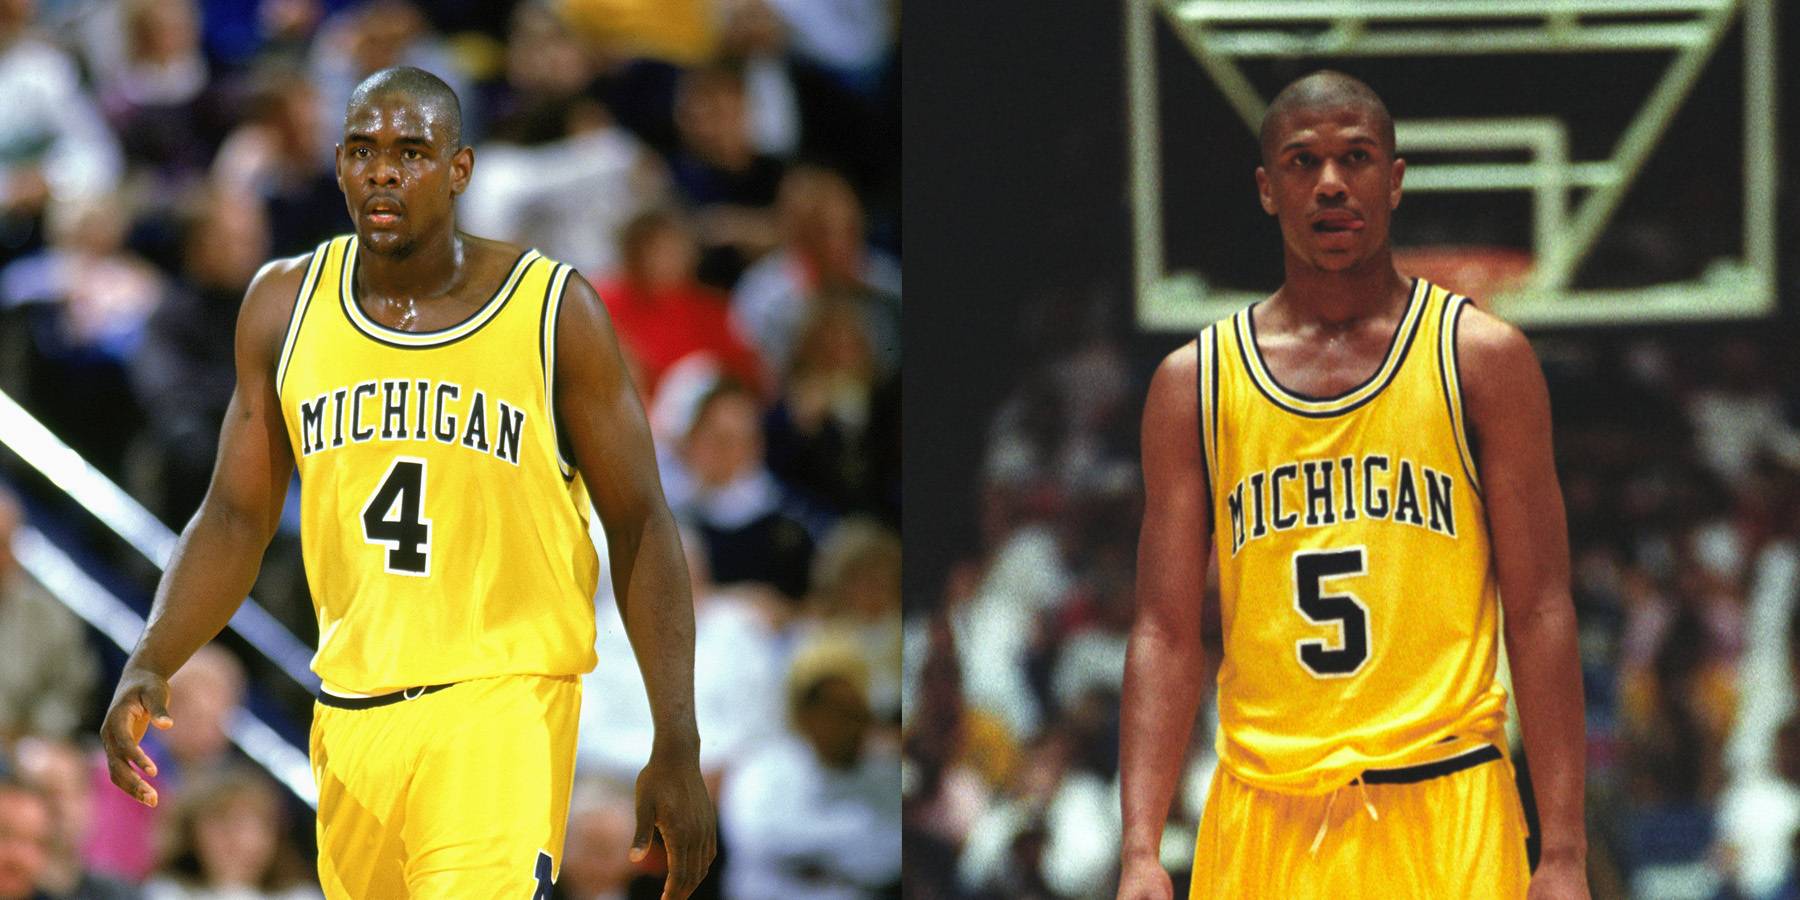 Jalen Rose Plans to Meet with Michigan Fab 5 Teammate Chris Webber, Settle  Feud, News, Scores, Highlights, Stats, and Rumors